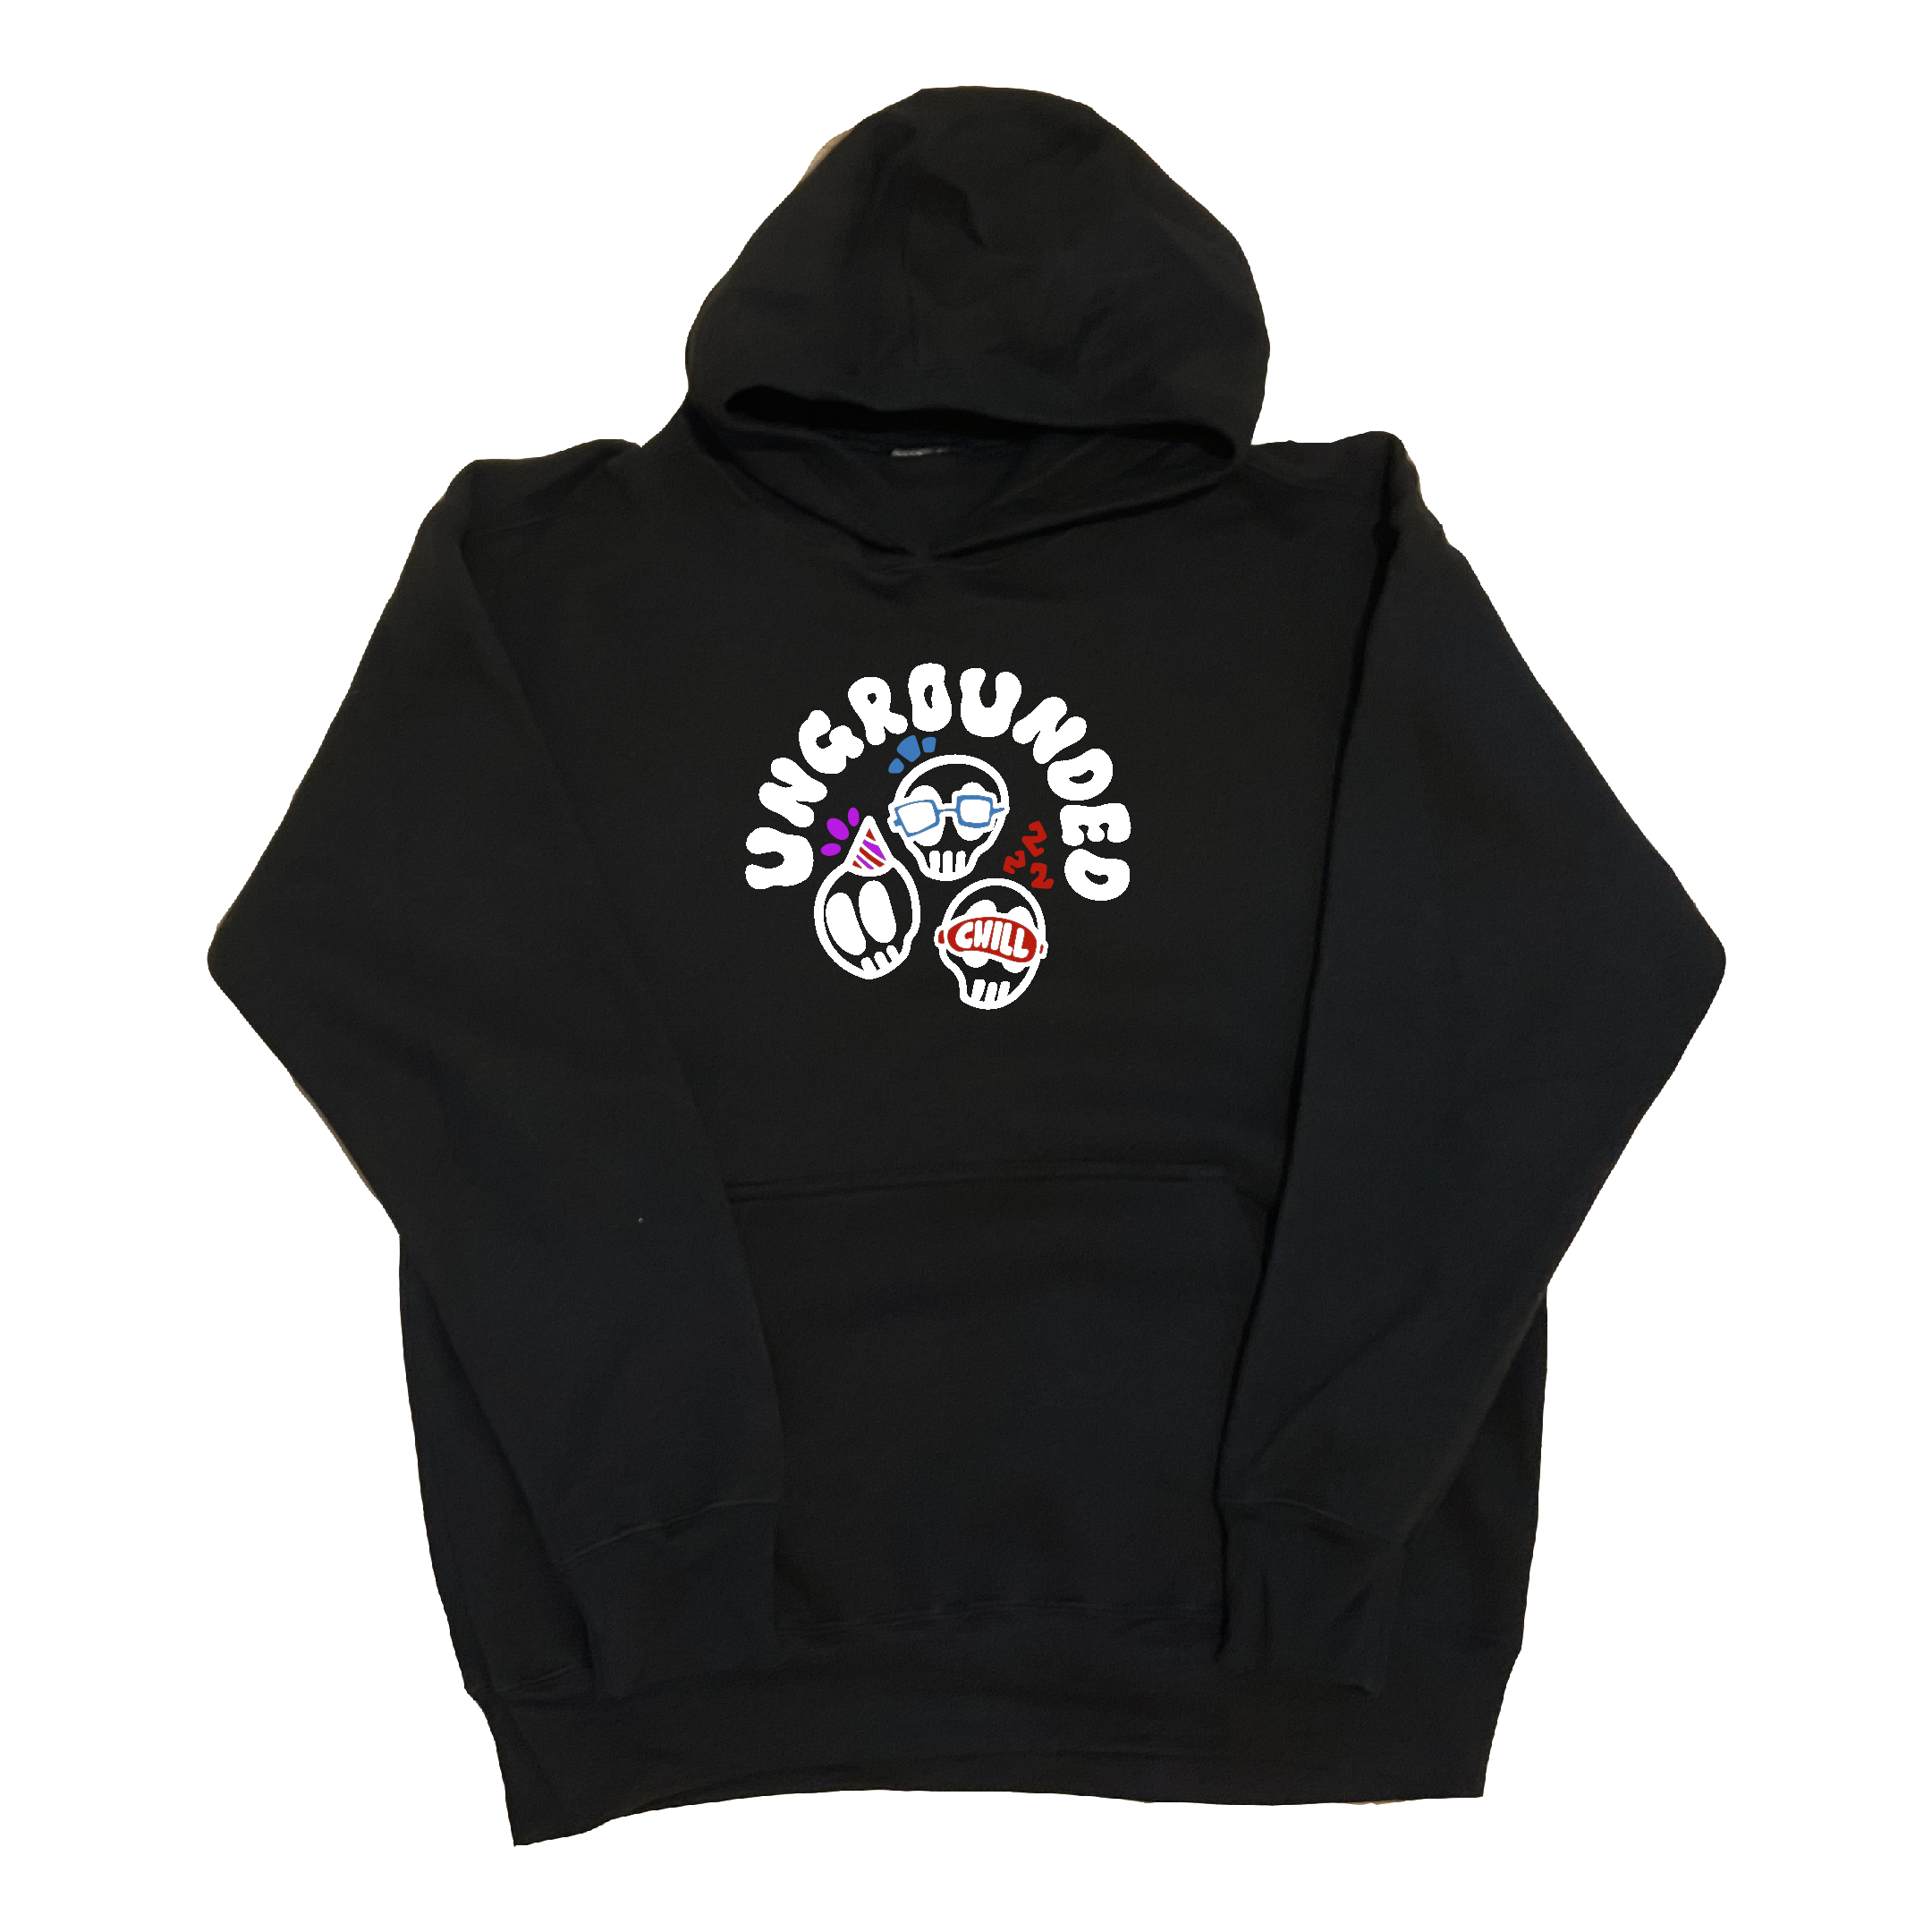 Ungrounded Still Alive Hoodie (Black)